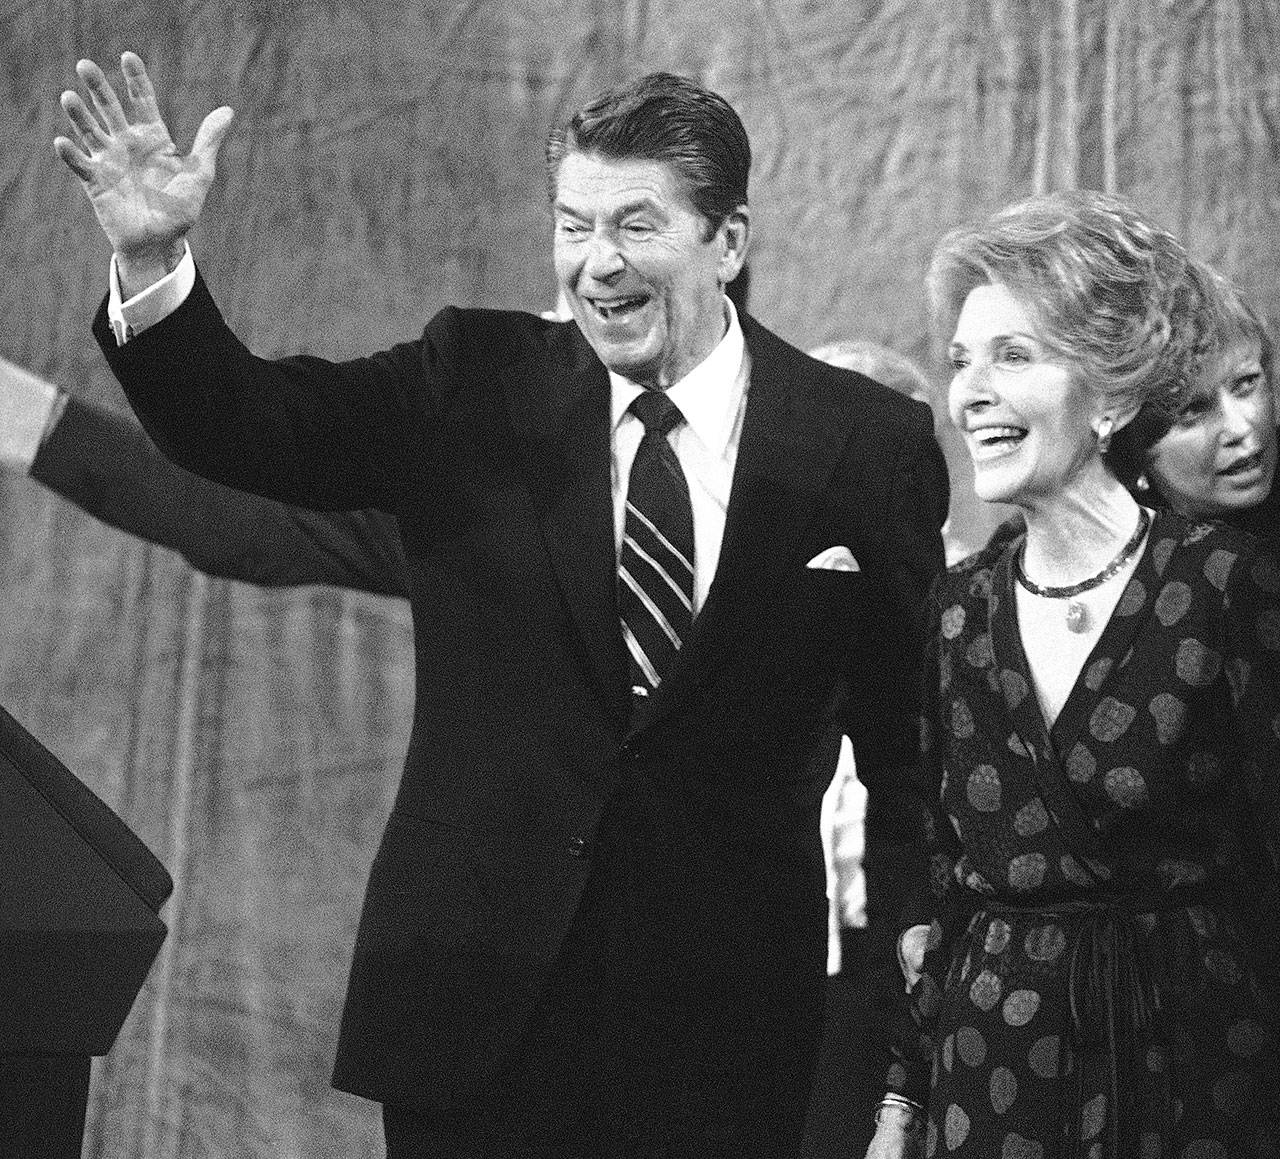 A triumphant Ronald Reagan and his wife, Nancy, greet supporters at his election night headquarters in Los Angeles on Nov. 5, 1980. Reagan defeated President Jimmy Carter in a landslide for the presidency. (Associated Press archive)